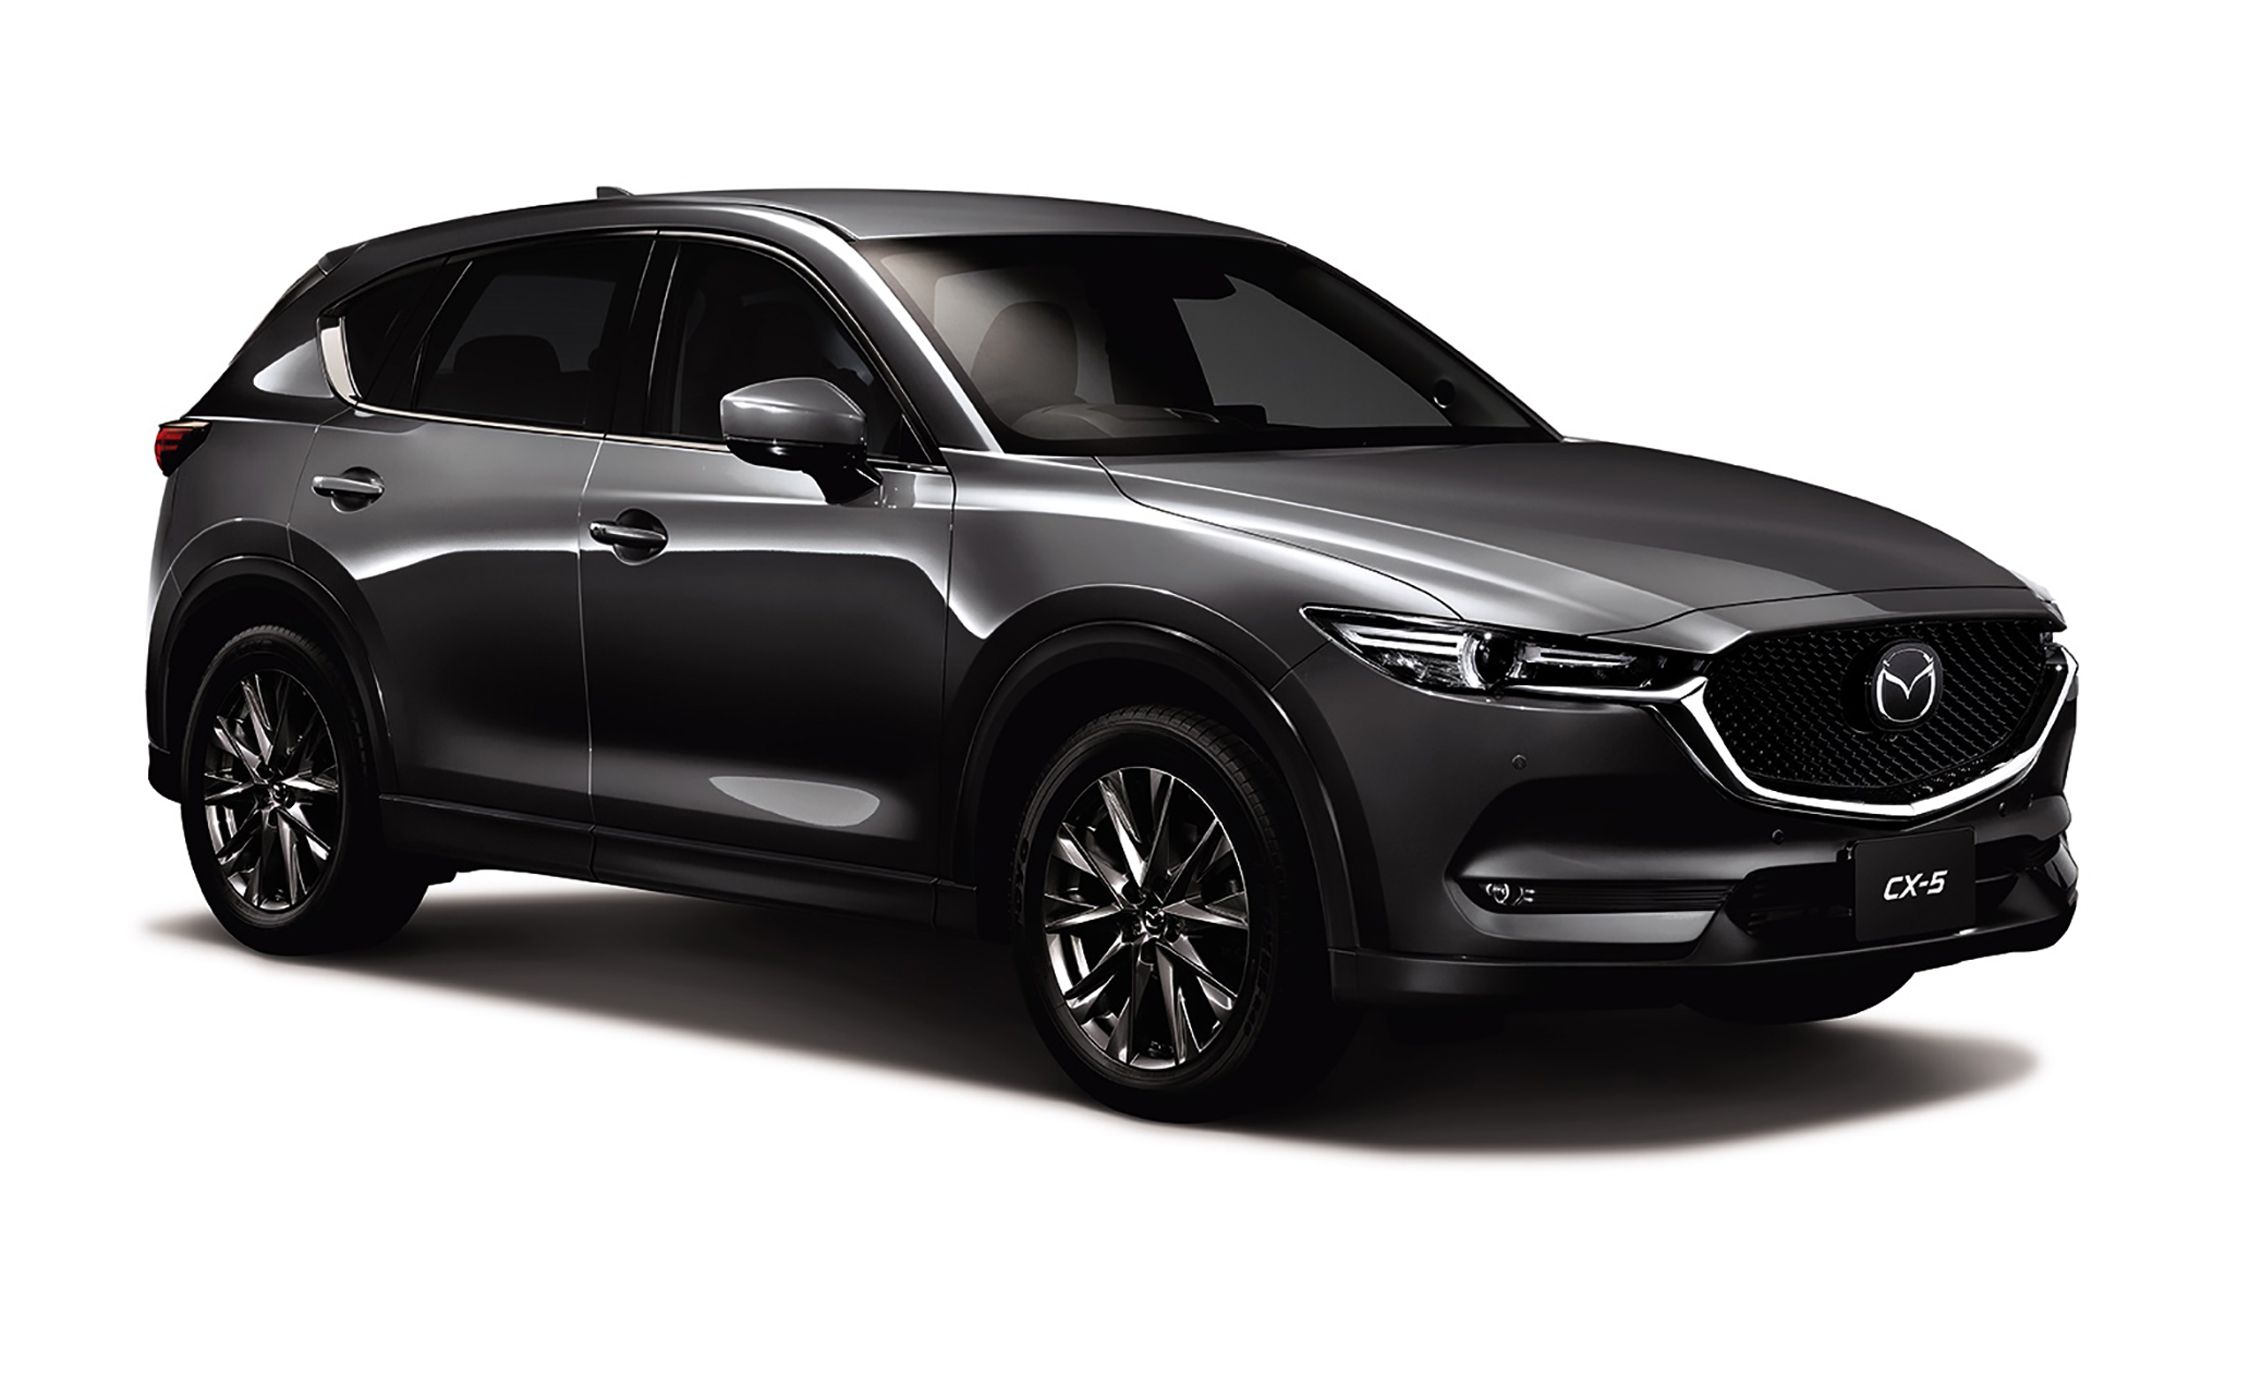 2019 Mazda CX-5 Expected to Get Turbo Engine – New 2.5T Optional Powertrain